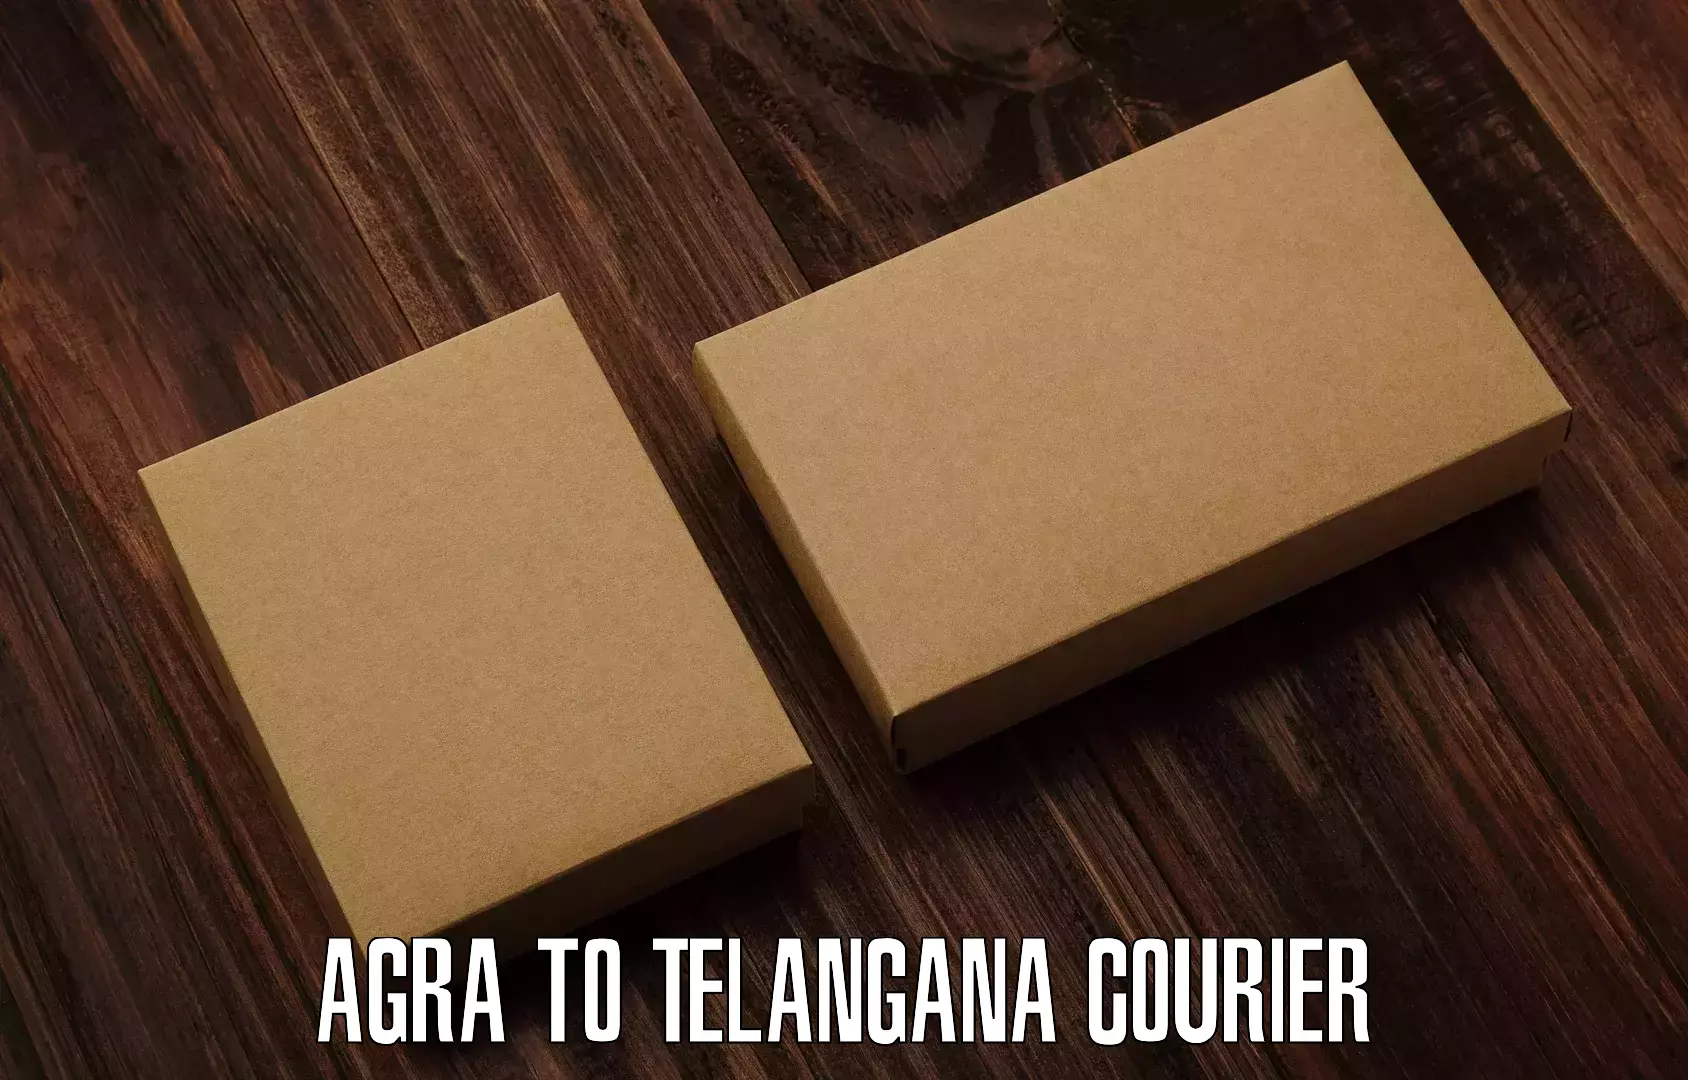 Professional courier handling Agra to Telangana